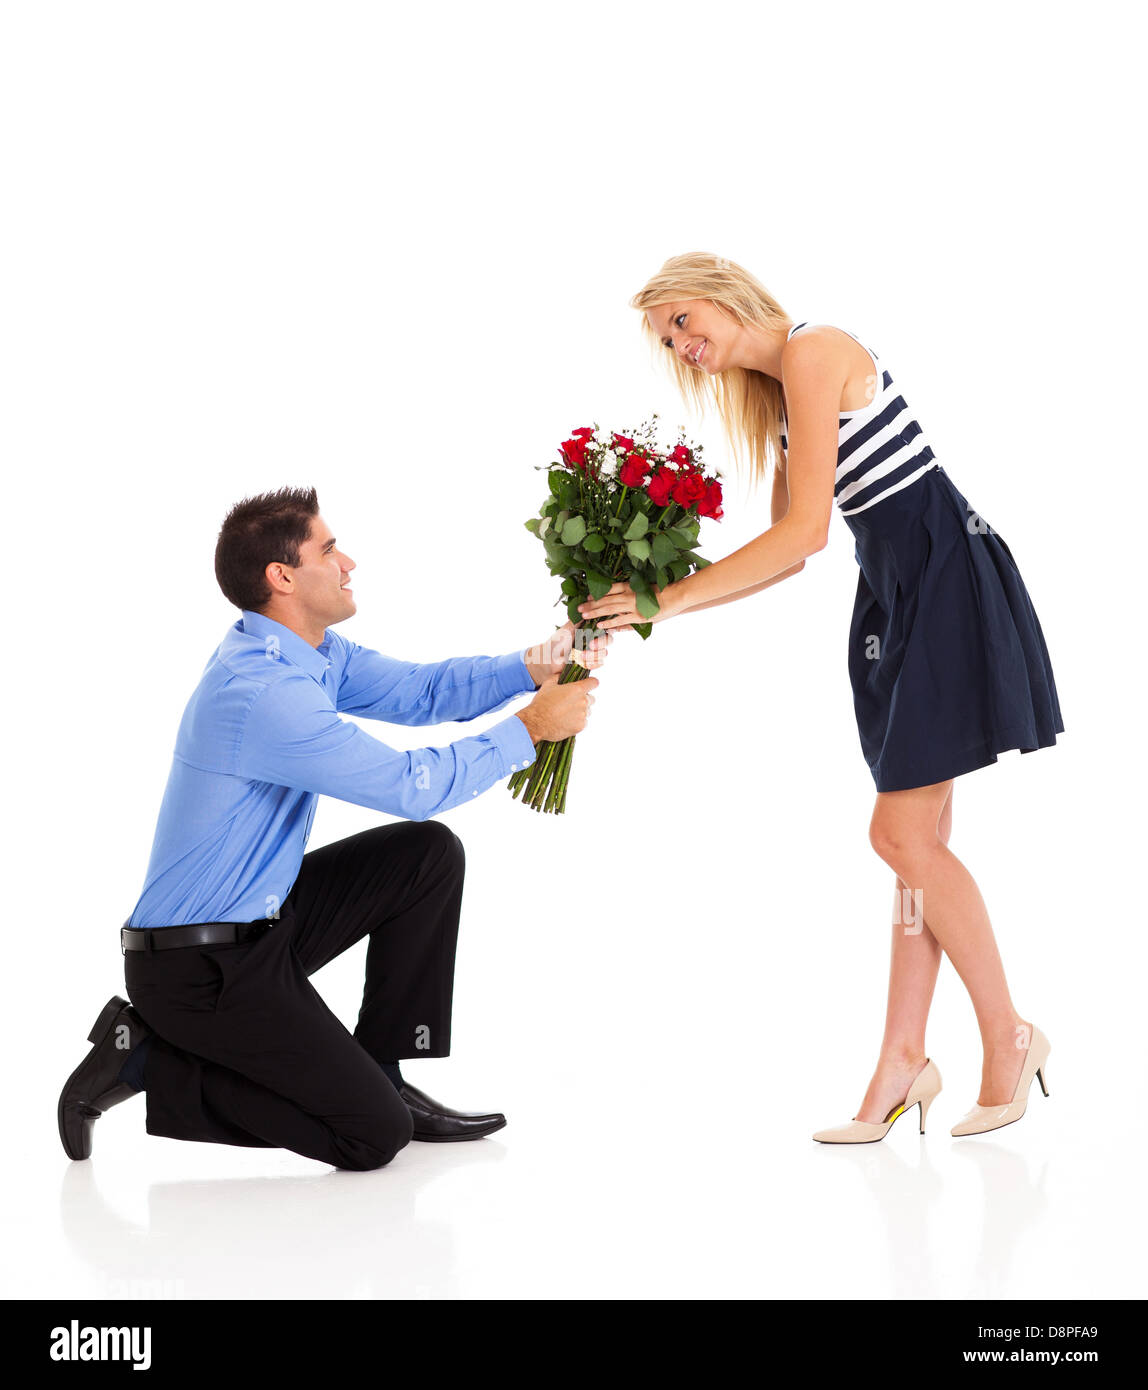 young woman accepting roses from a man on valentine's day Stock Photo